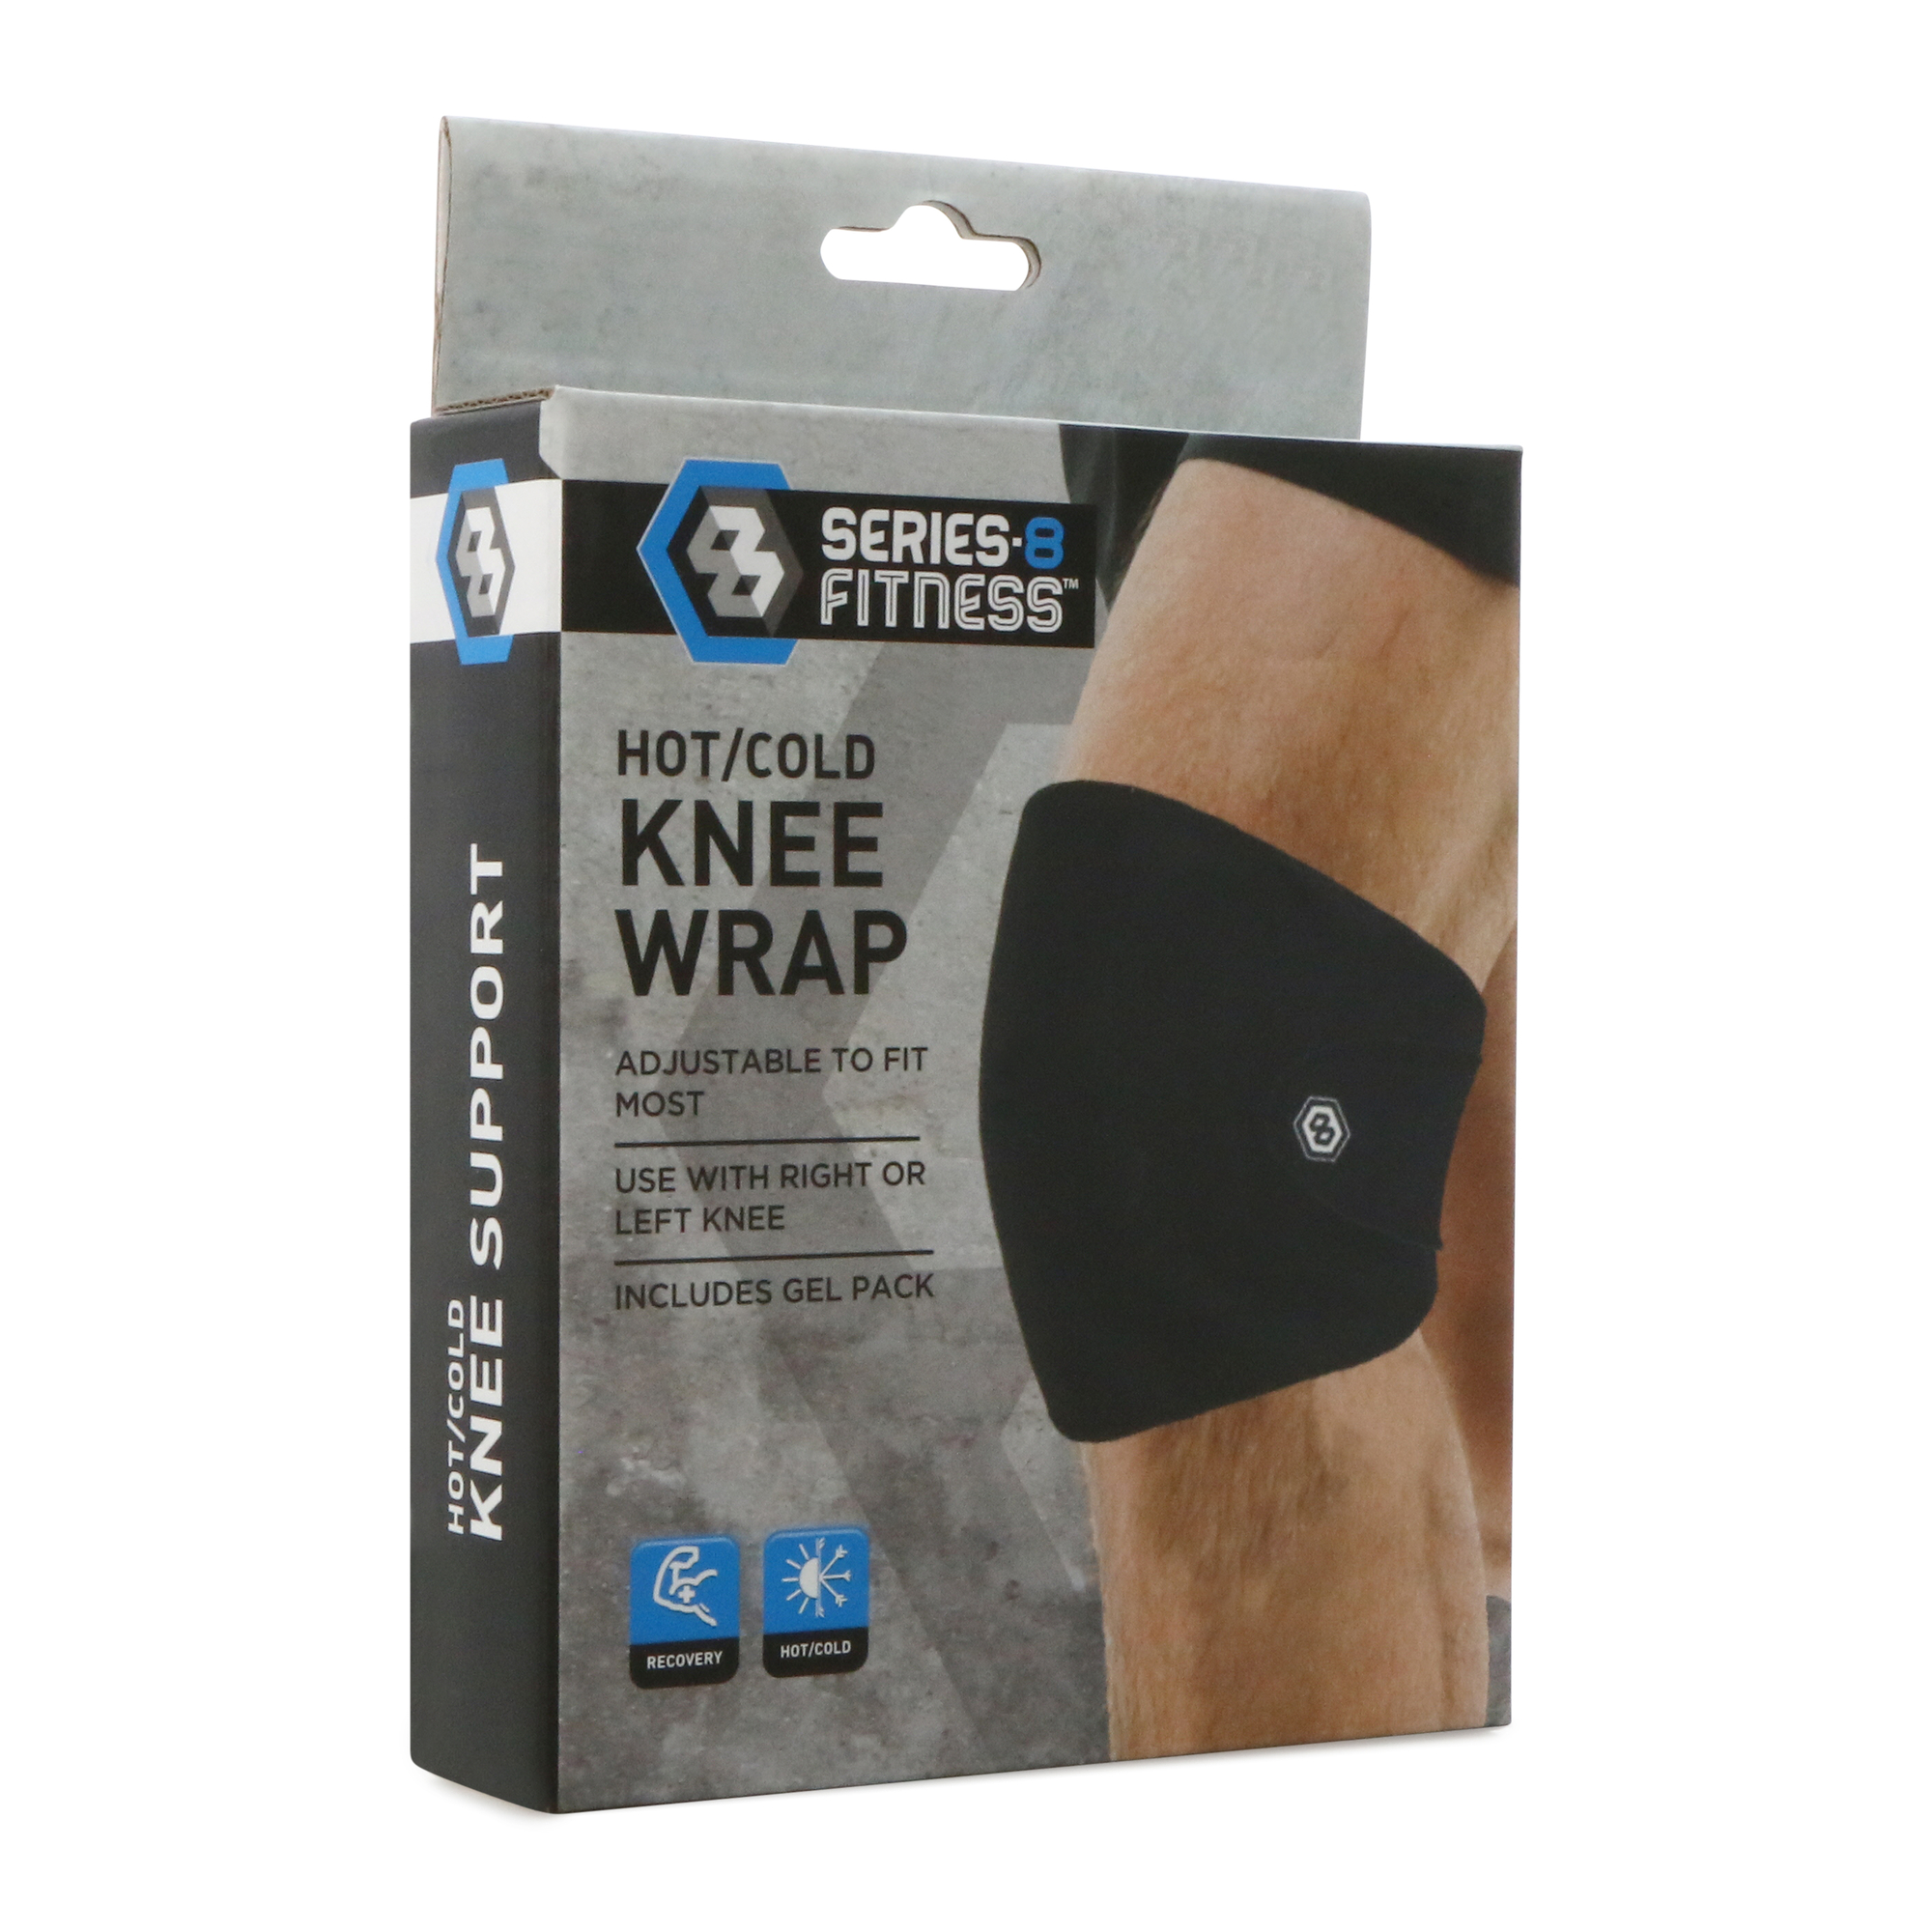 series-8 fitness™ hot/cold knee wrap